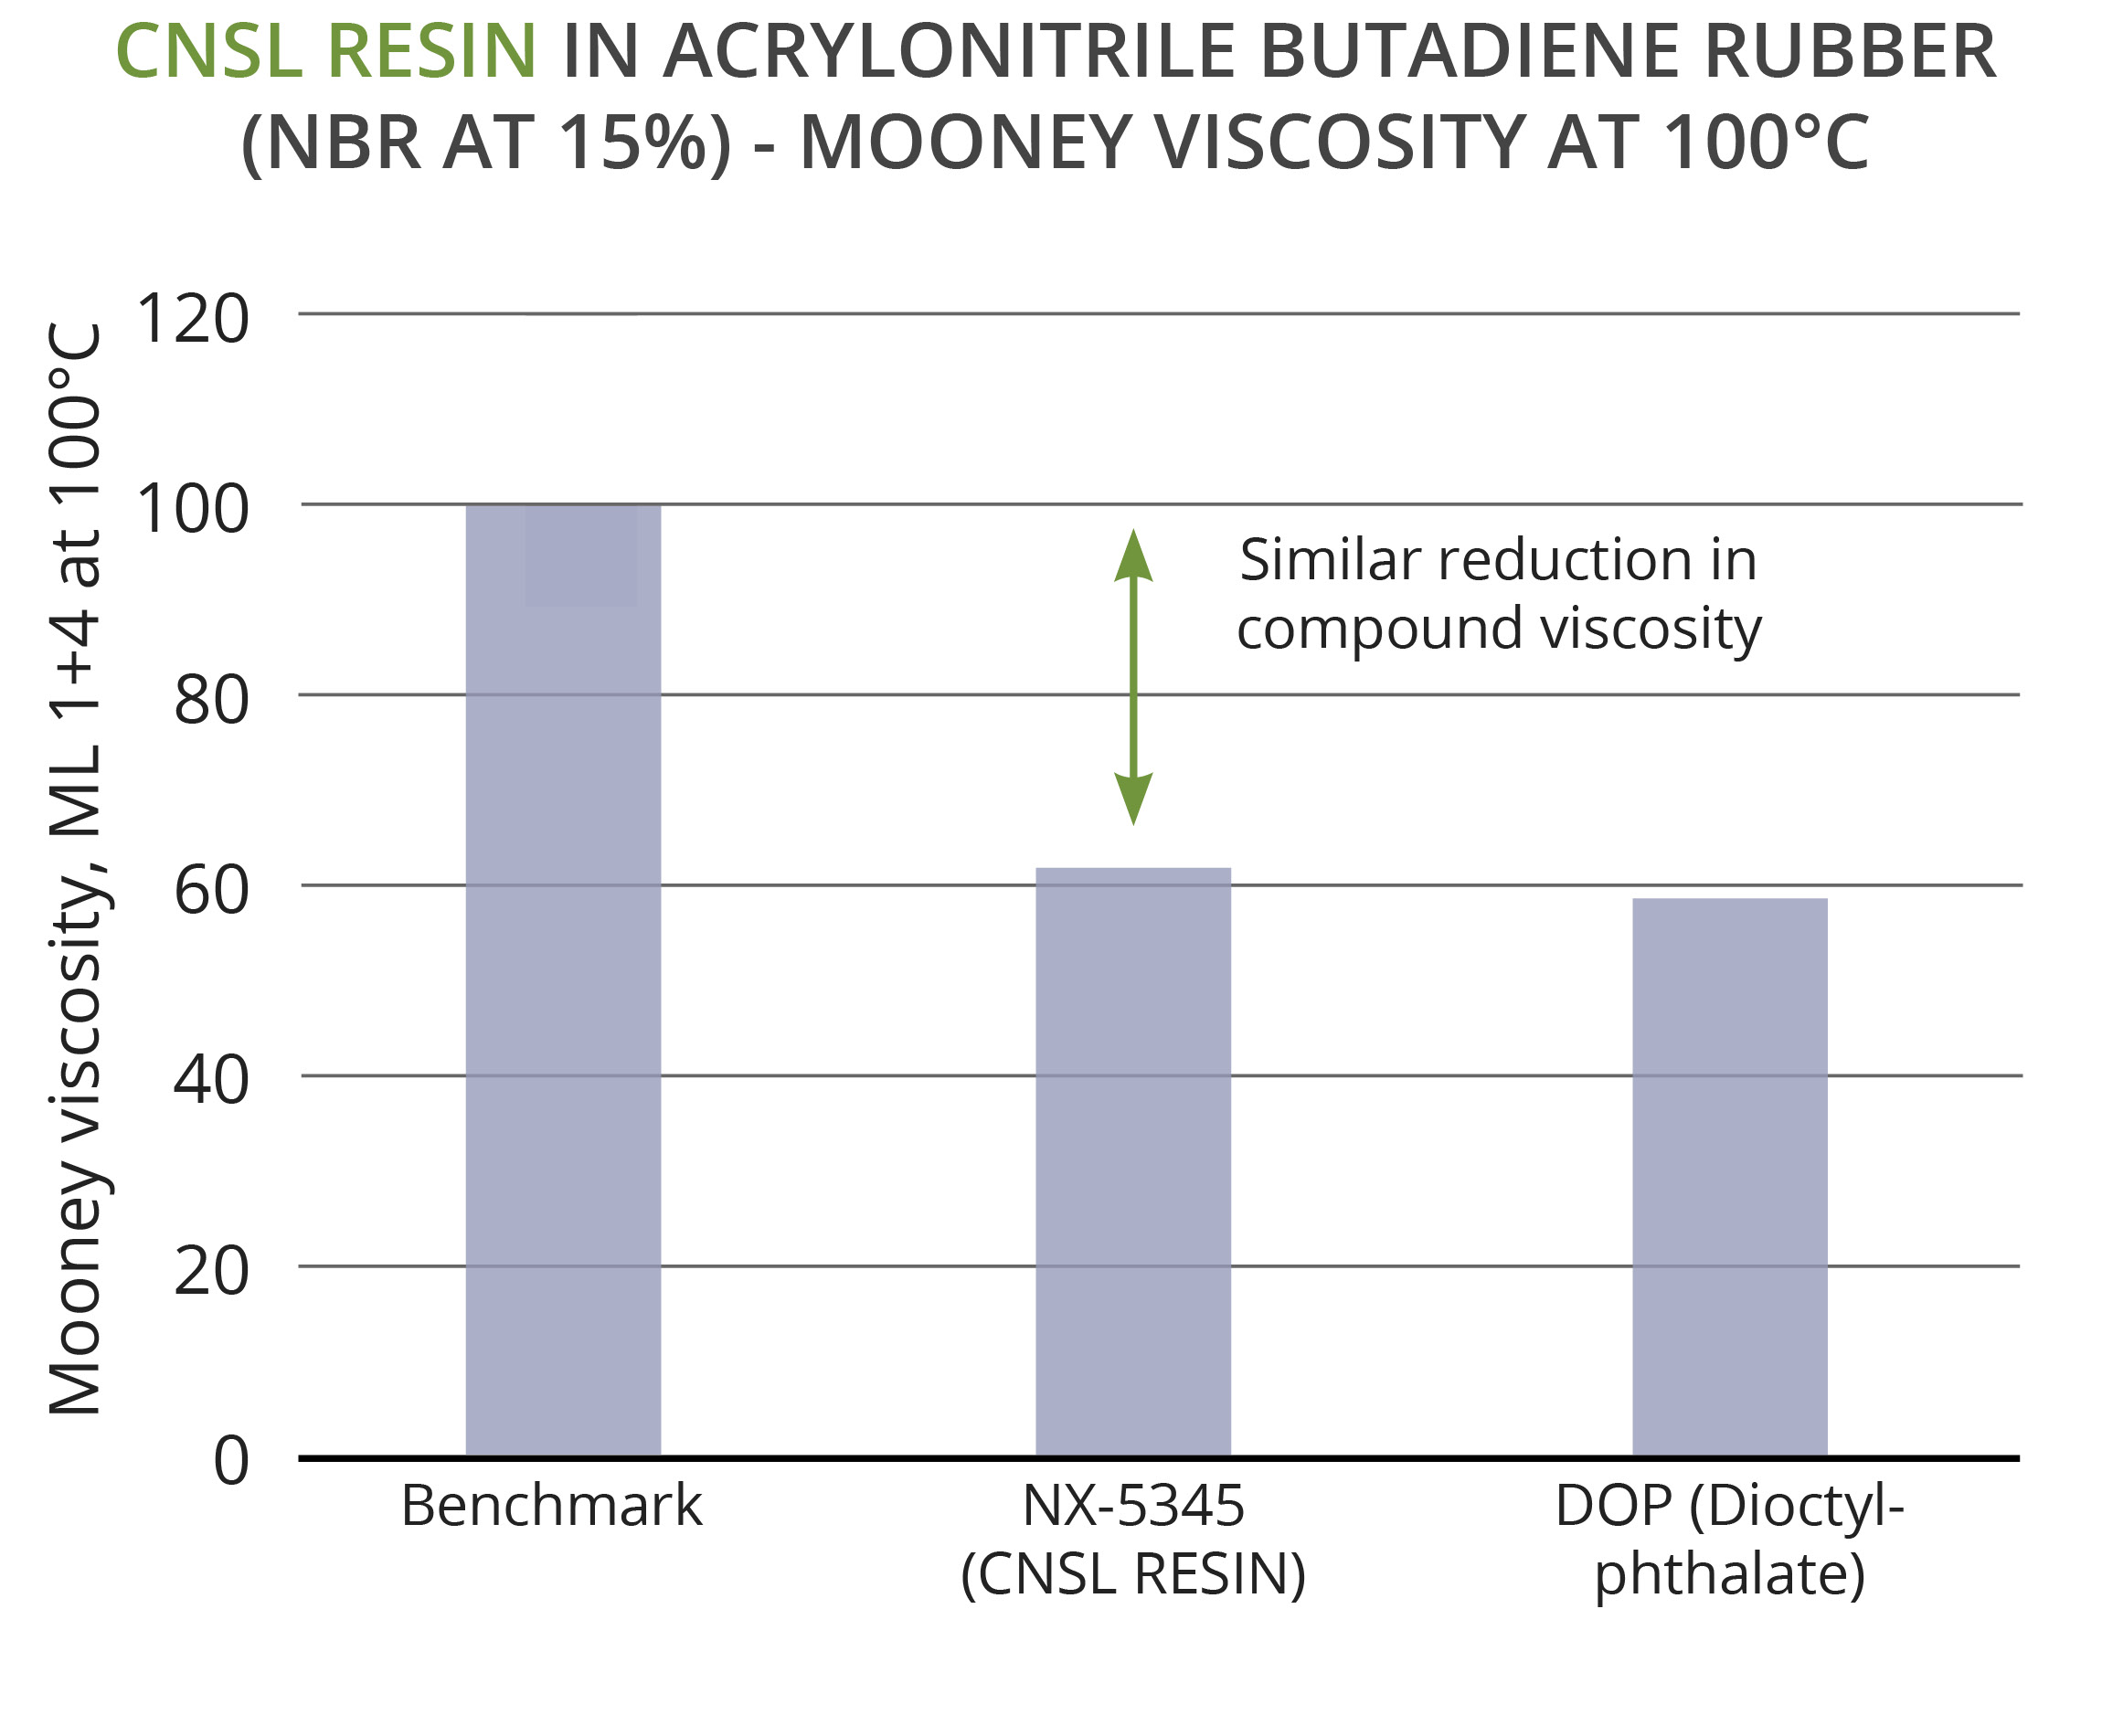 CNSL Resins can replace phthalates and polyesters as plasticizers in nitrile butadiene rubber